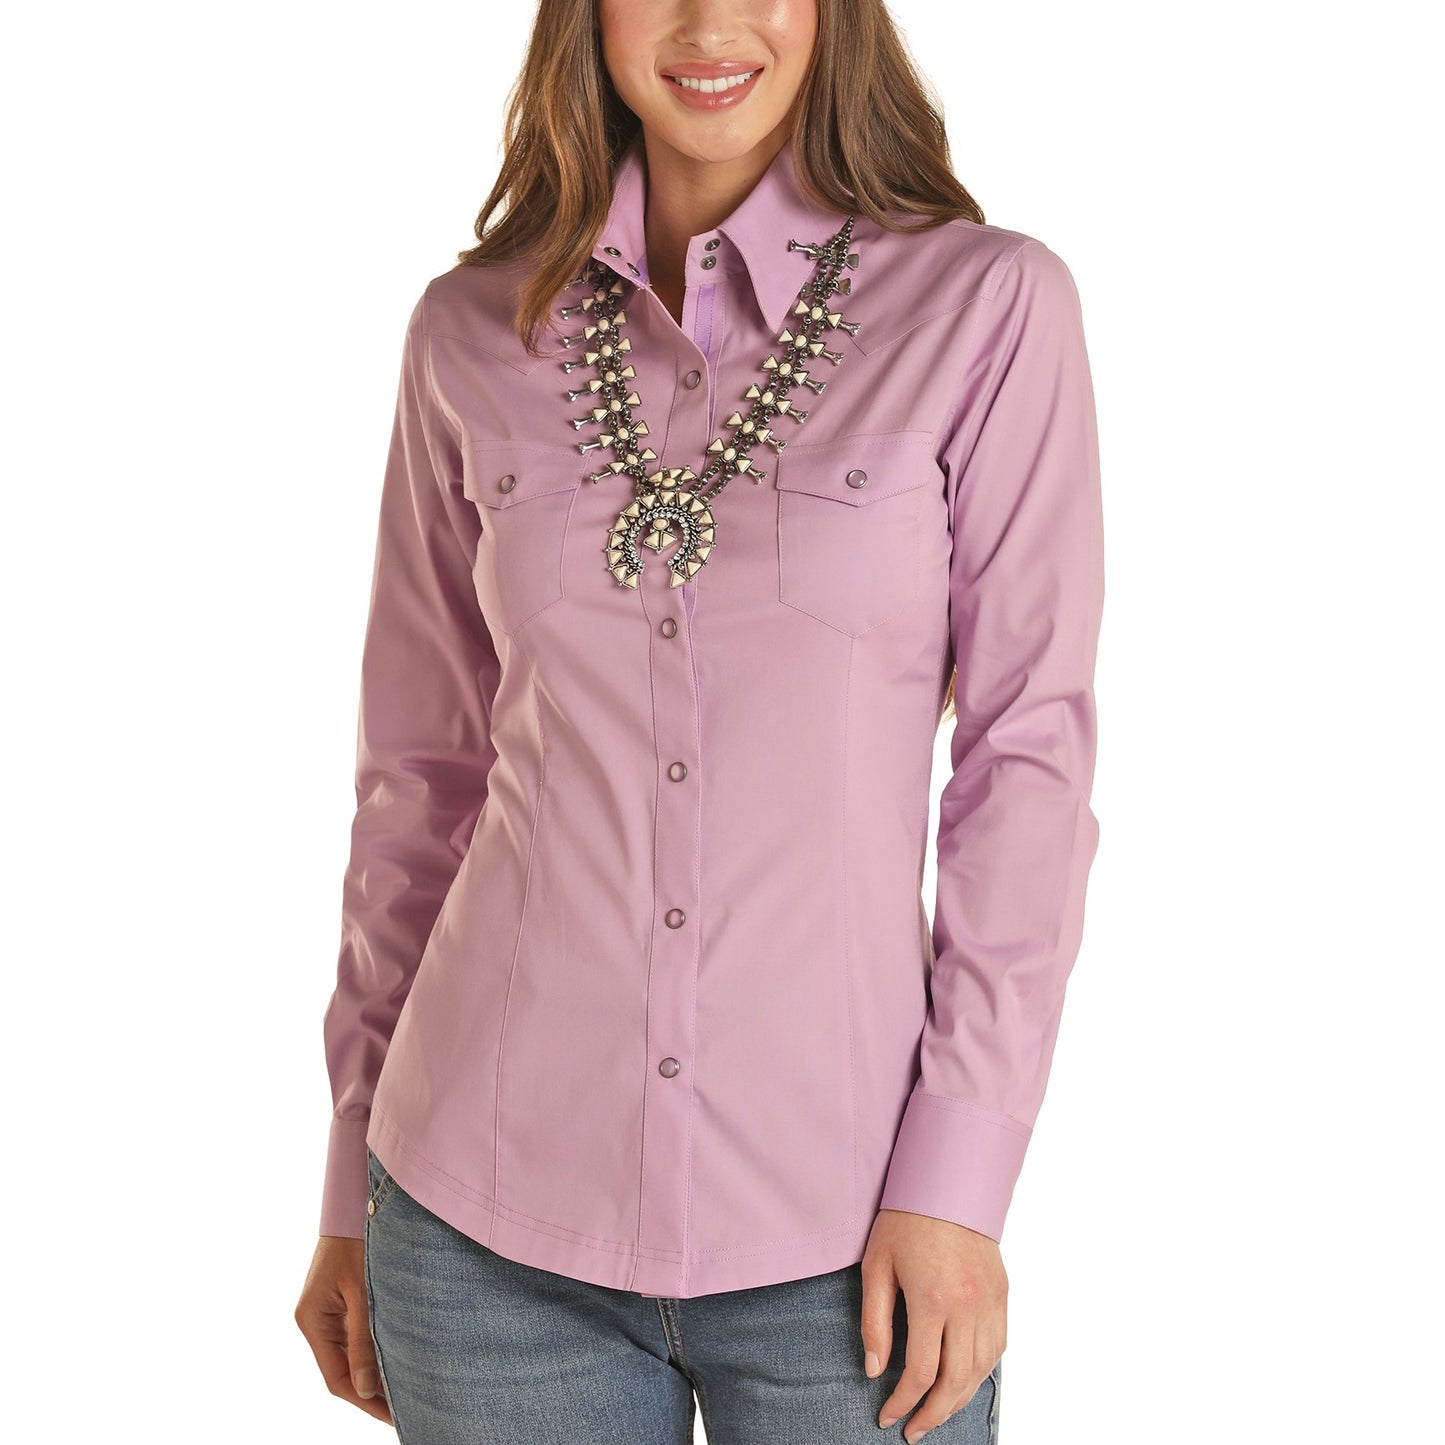 Panhandle Select Ladies Solid Orchid Long Sleeve Snap Shirt 22S9341-58